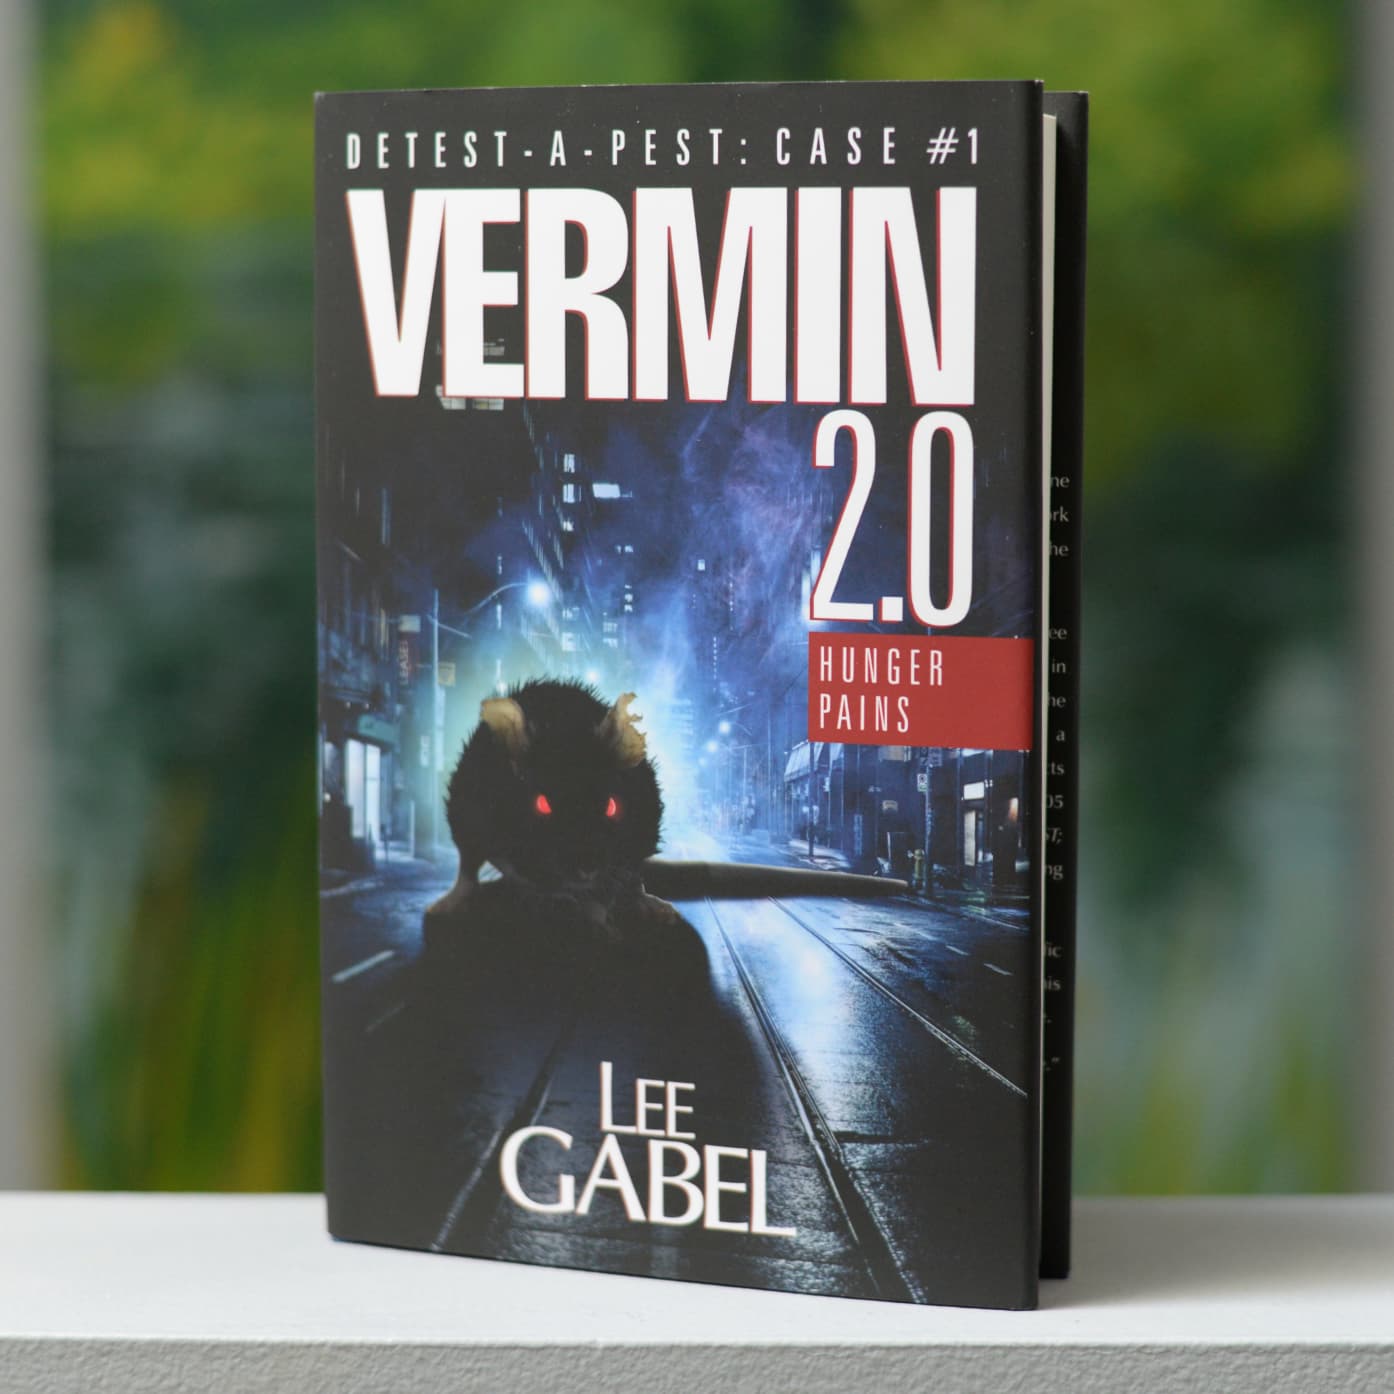 Vermin 2.0 actual hardcover image (304 pages.)